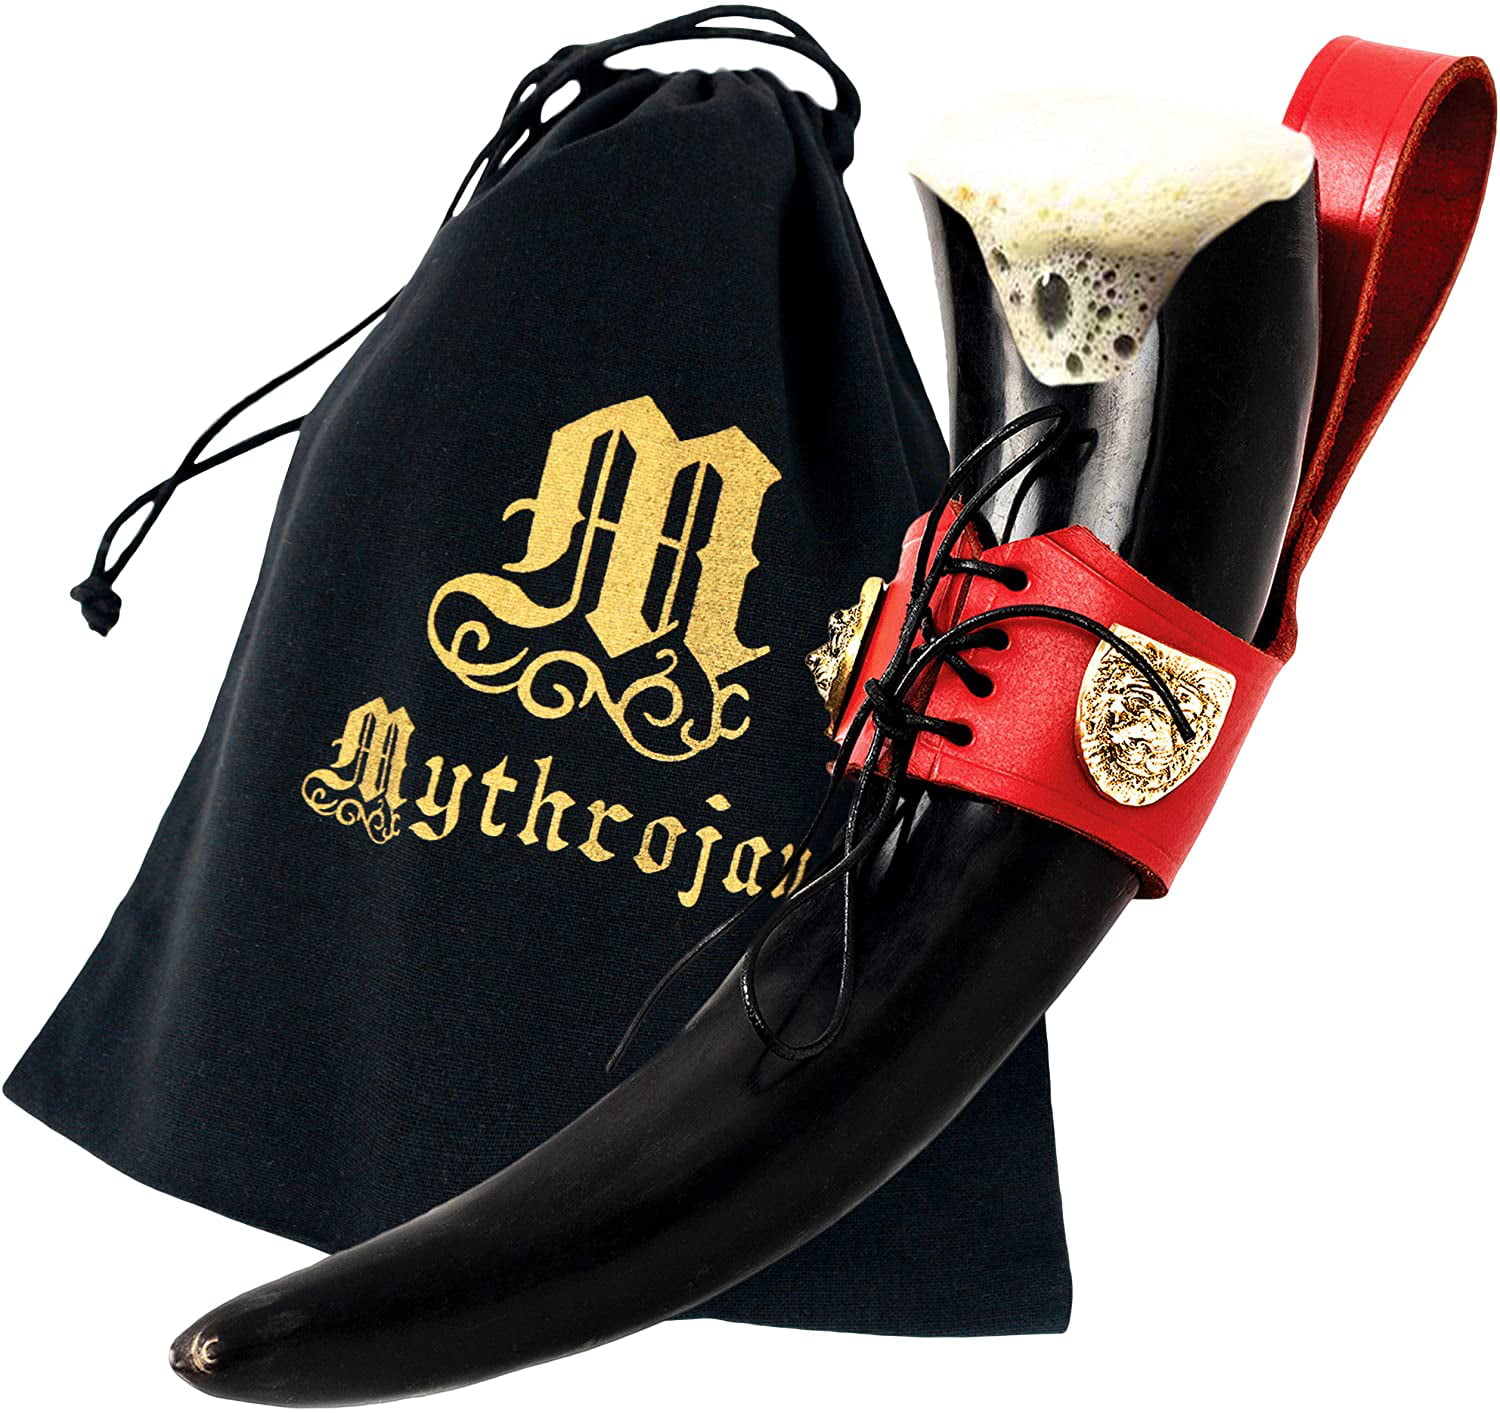 Viking Drinking Horn with Black Leather holder Authentic Medieval Inspired Viking Wine/Mead Mug Polished Finish Mythrojan THE LION ALWAYS PAYS ITS DEBTS